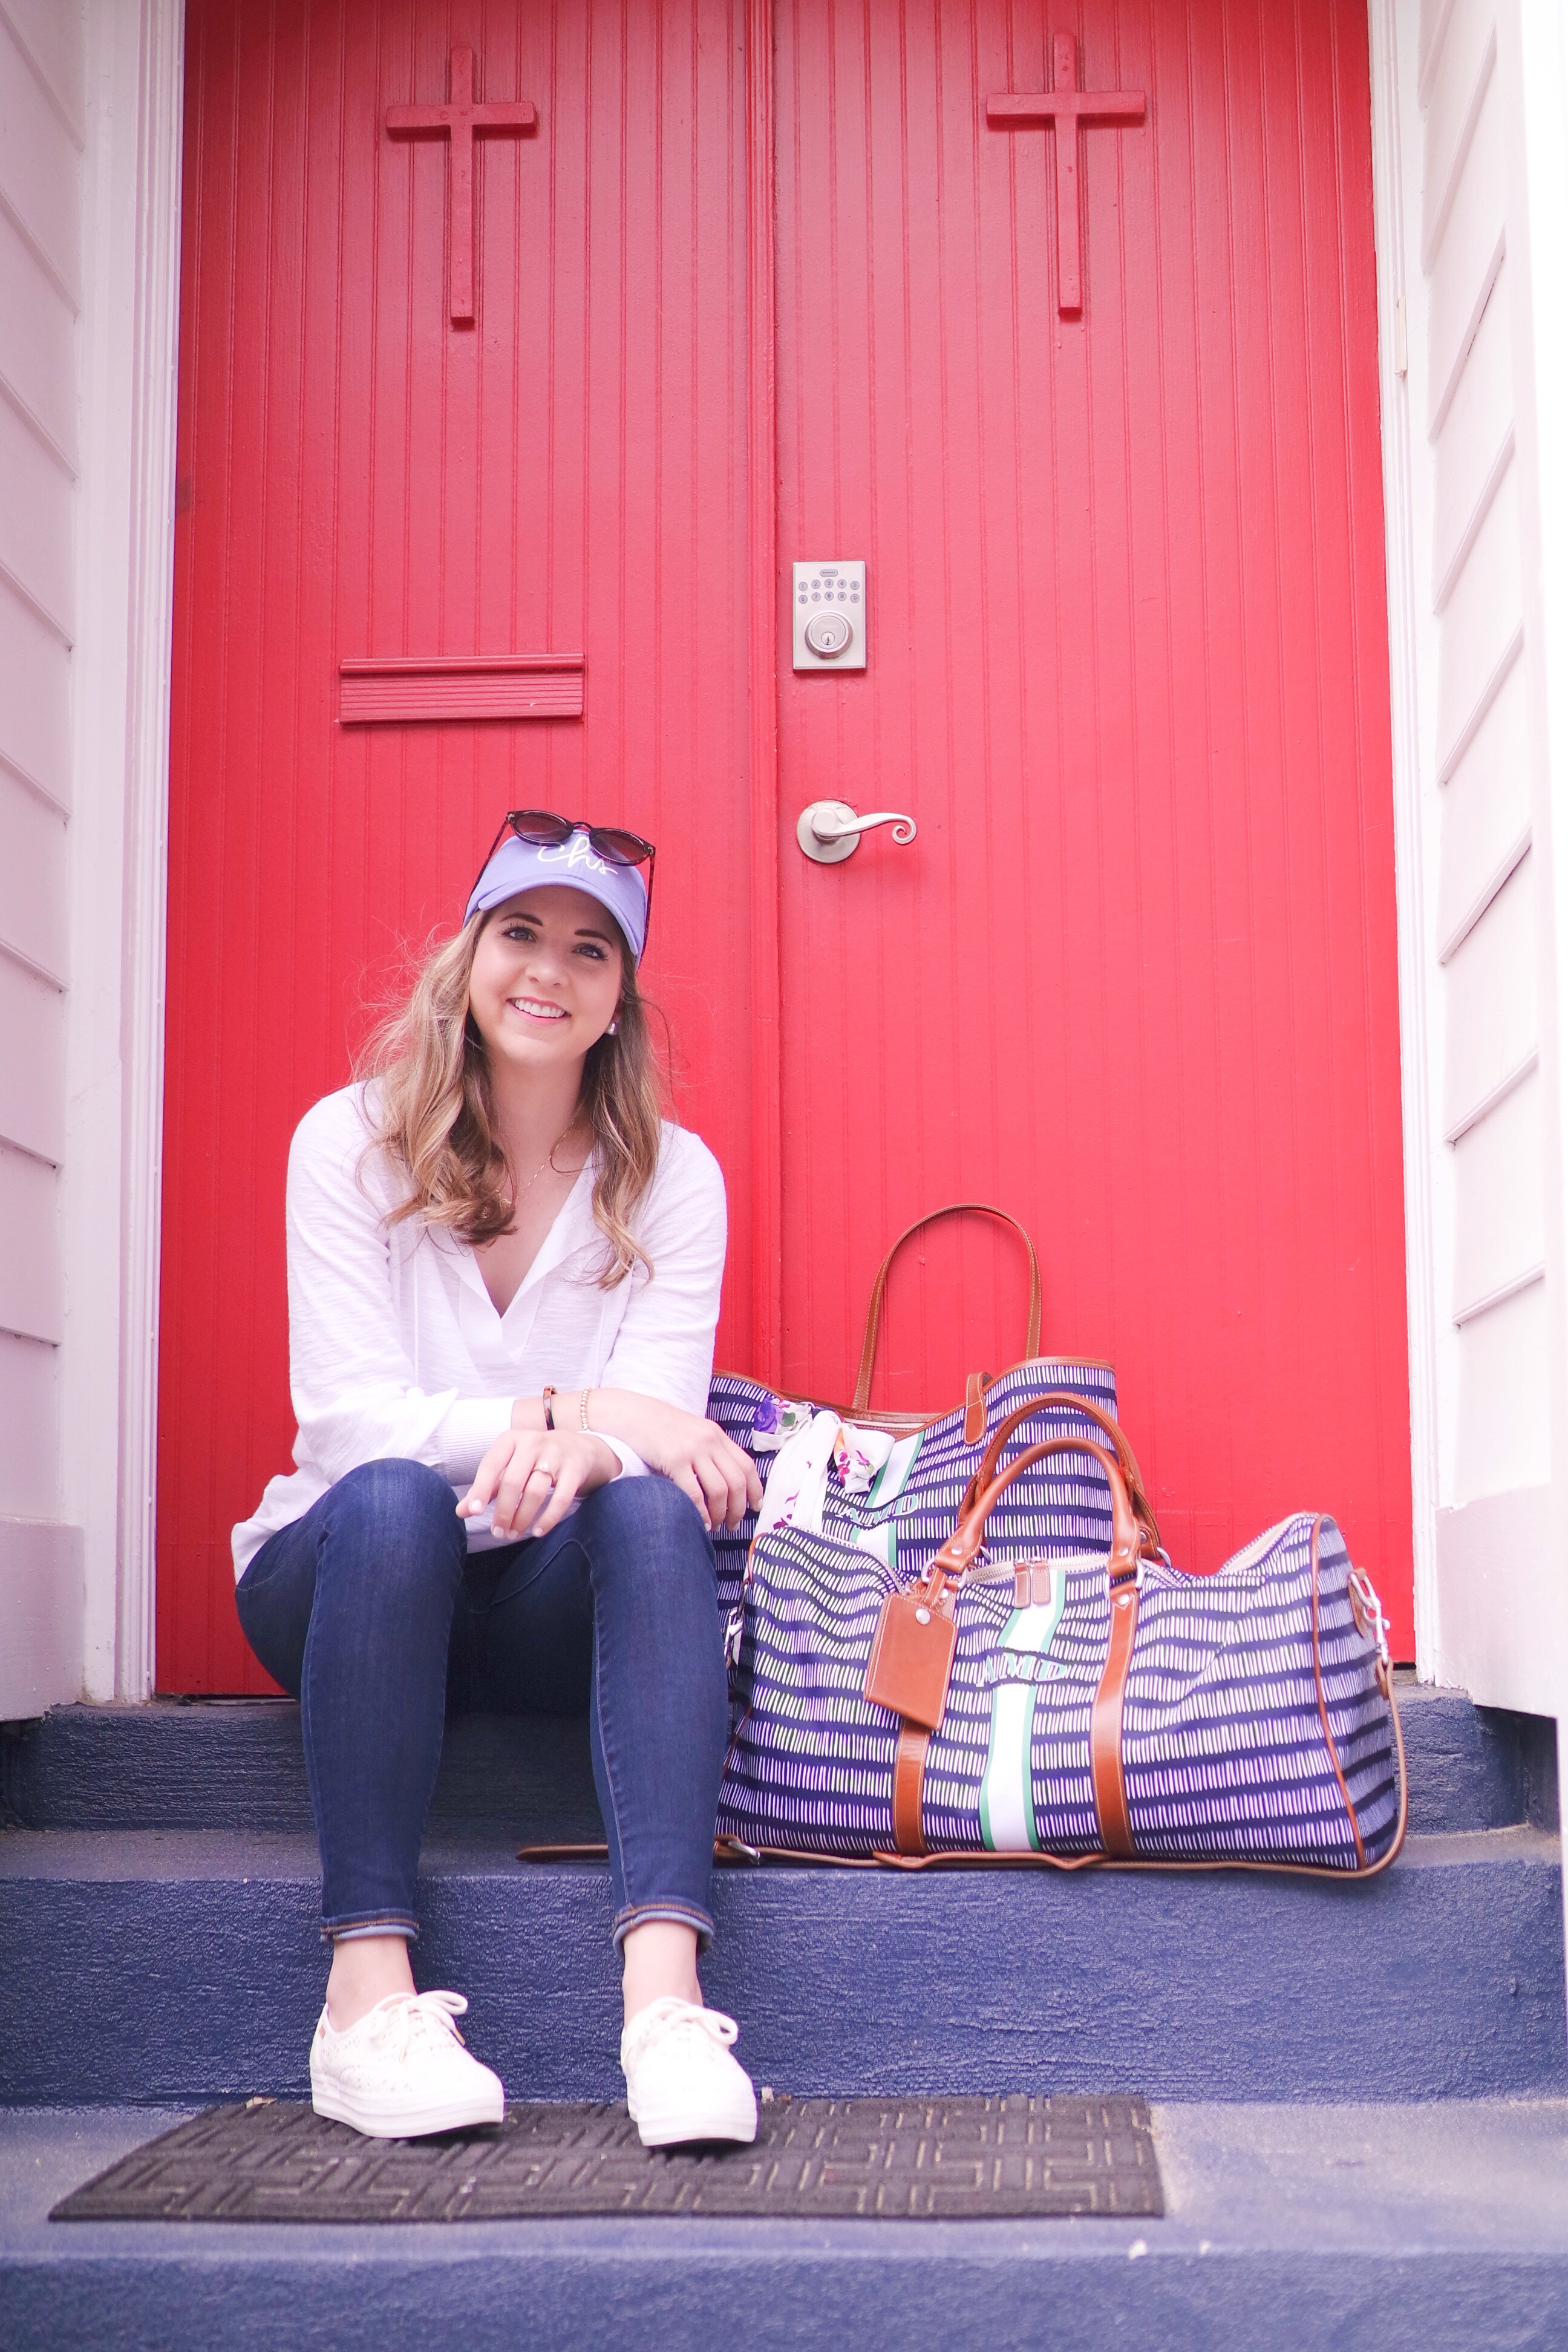 Comparing the Barrington Gifts Belmont Cabin Bag with the St Anne